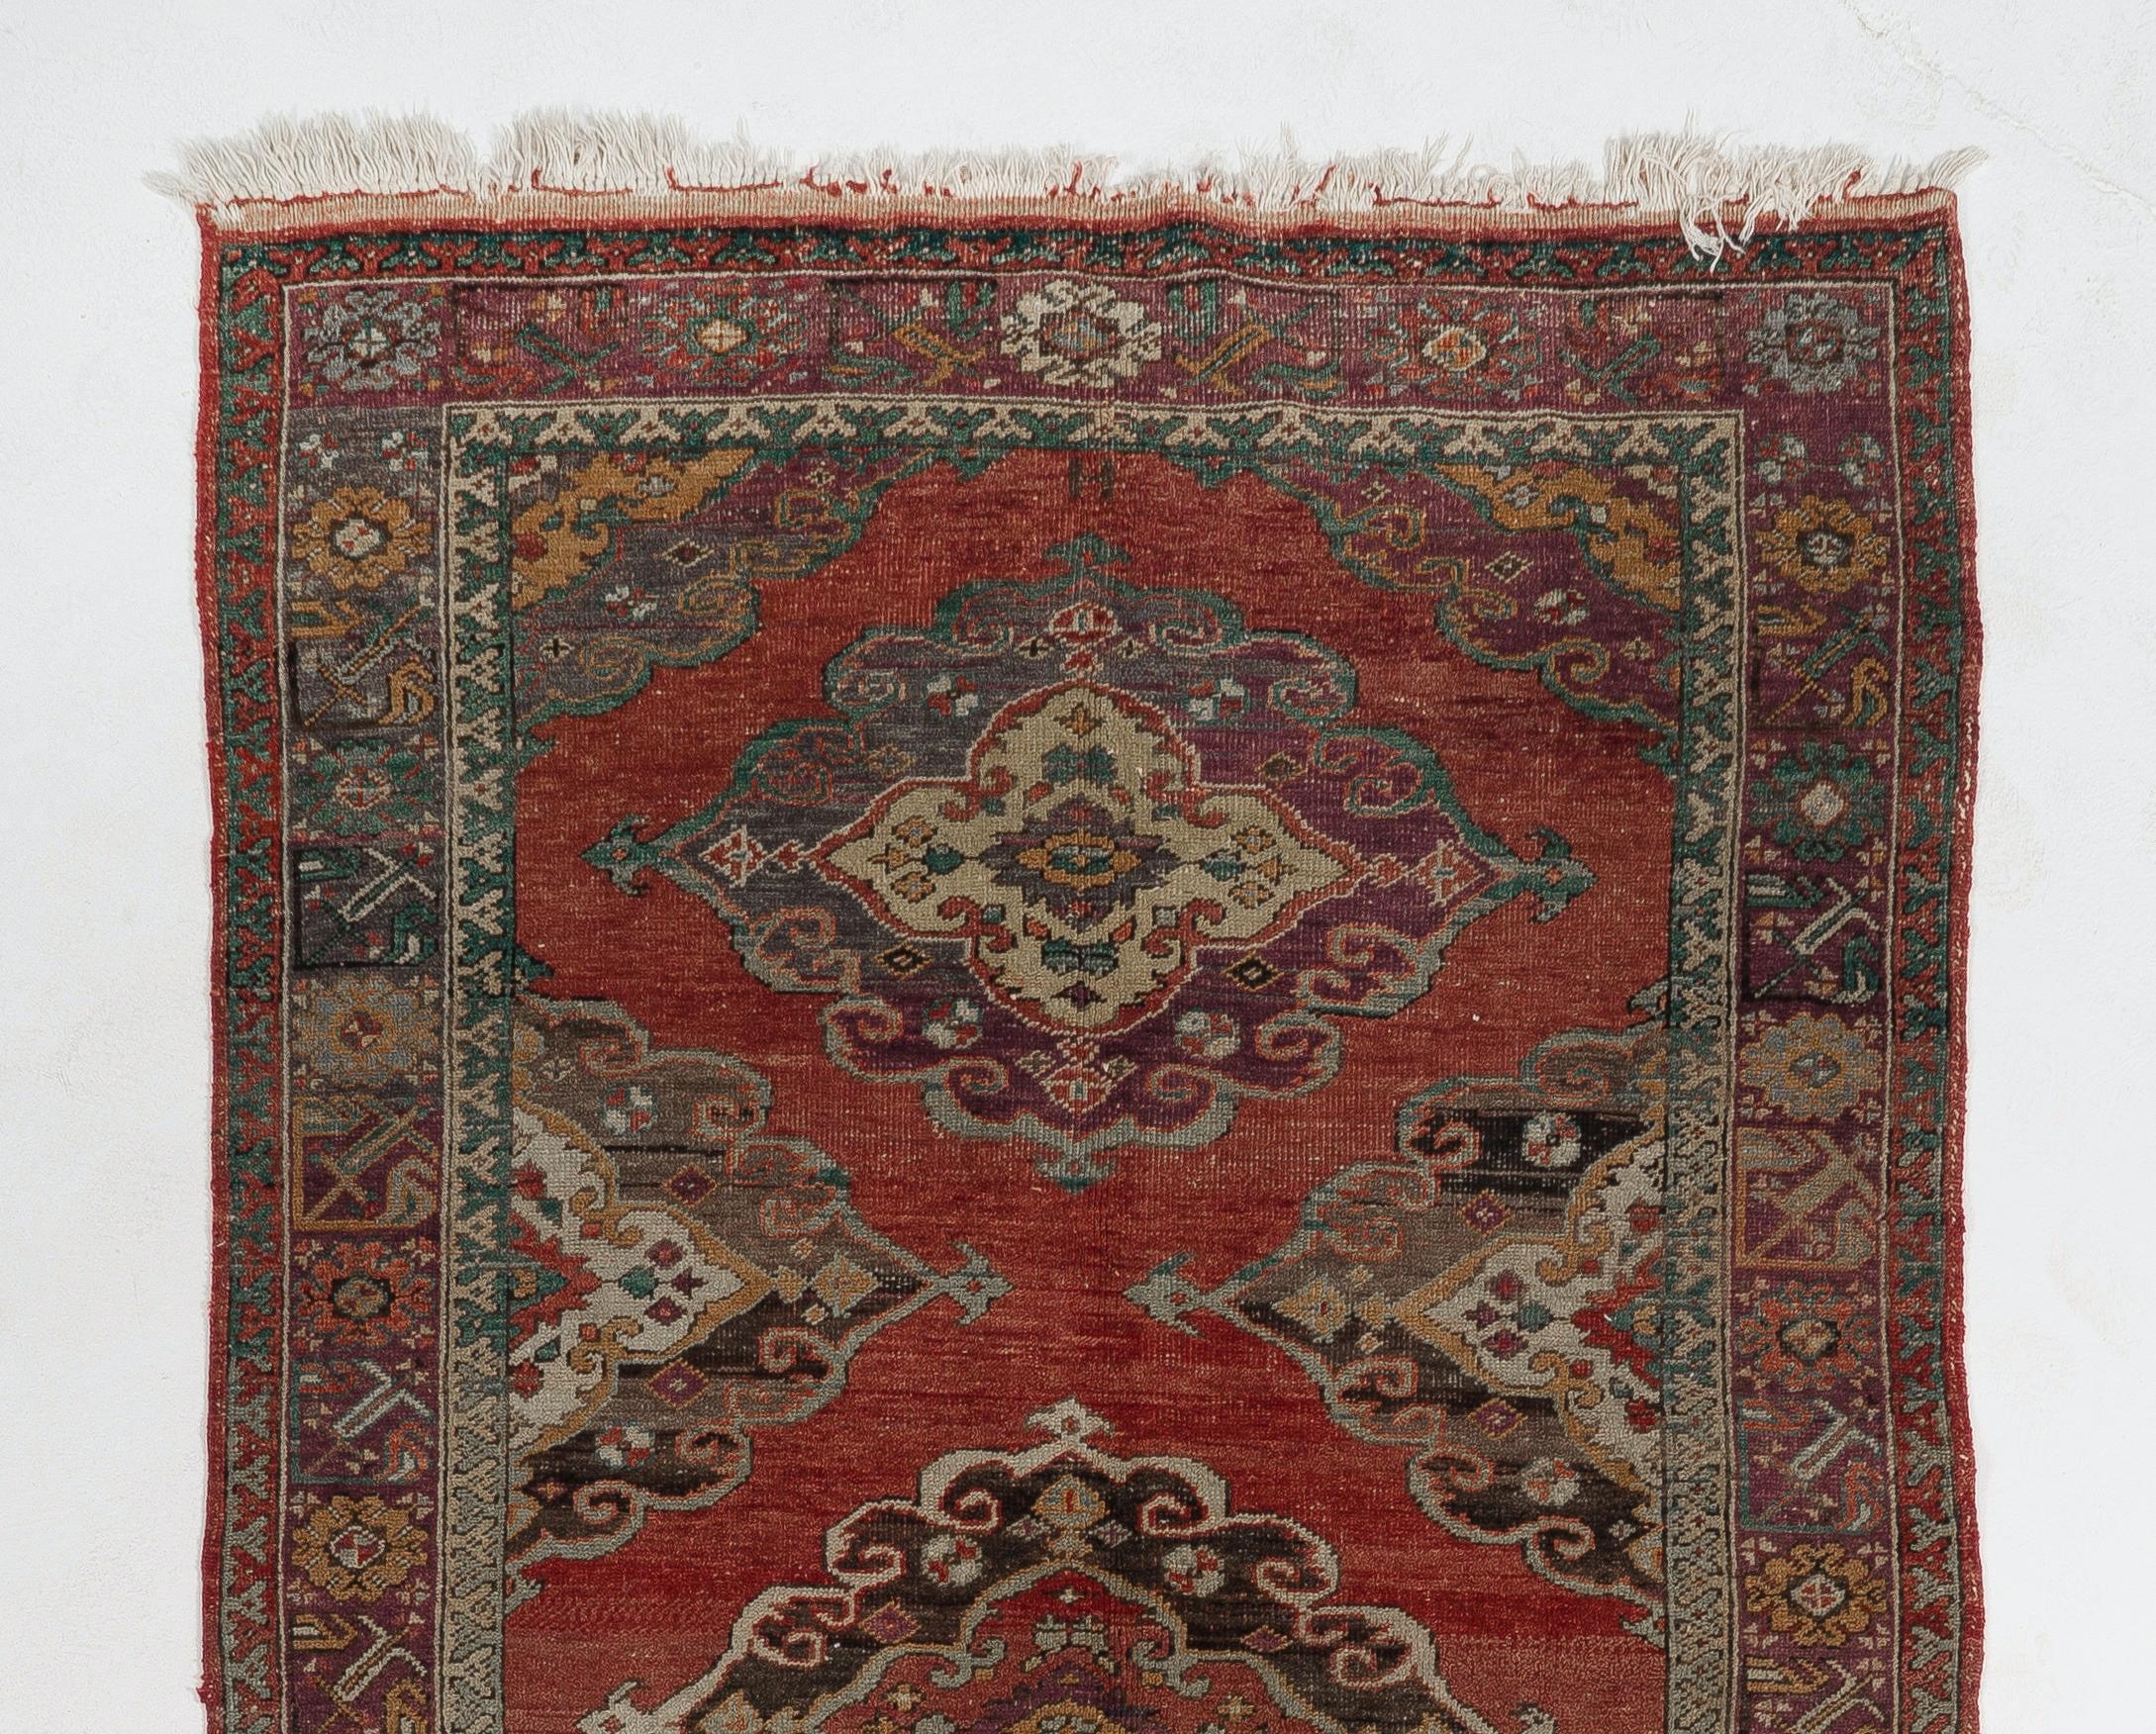 A finely hand-knotted vintage Turkish runner rug from 1940s featuring a multiple medallion design. The rug is made of medium wool pile on wool foundation. It is heavy and lays flat on the floor, in very good condition with no issues. It has been